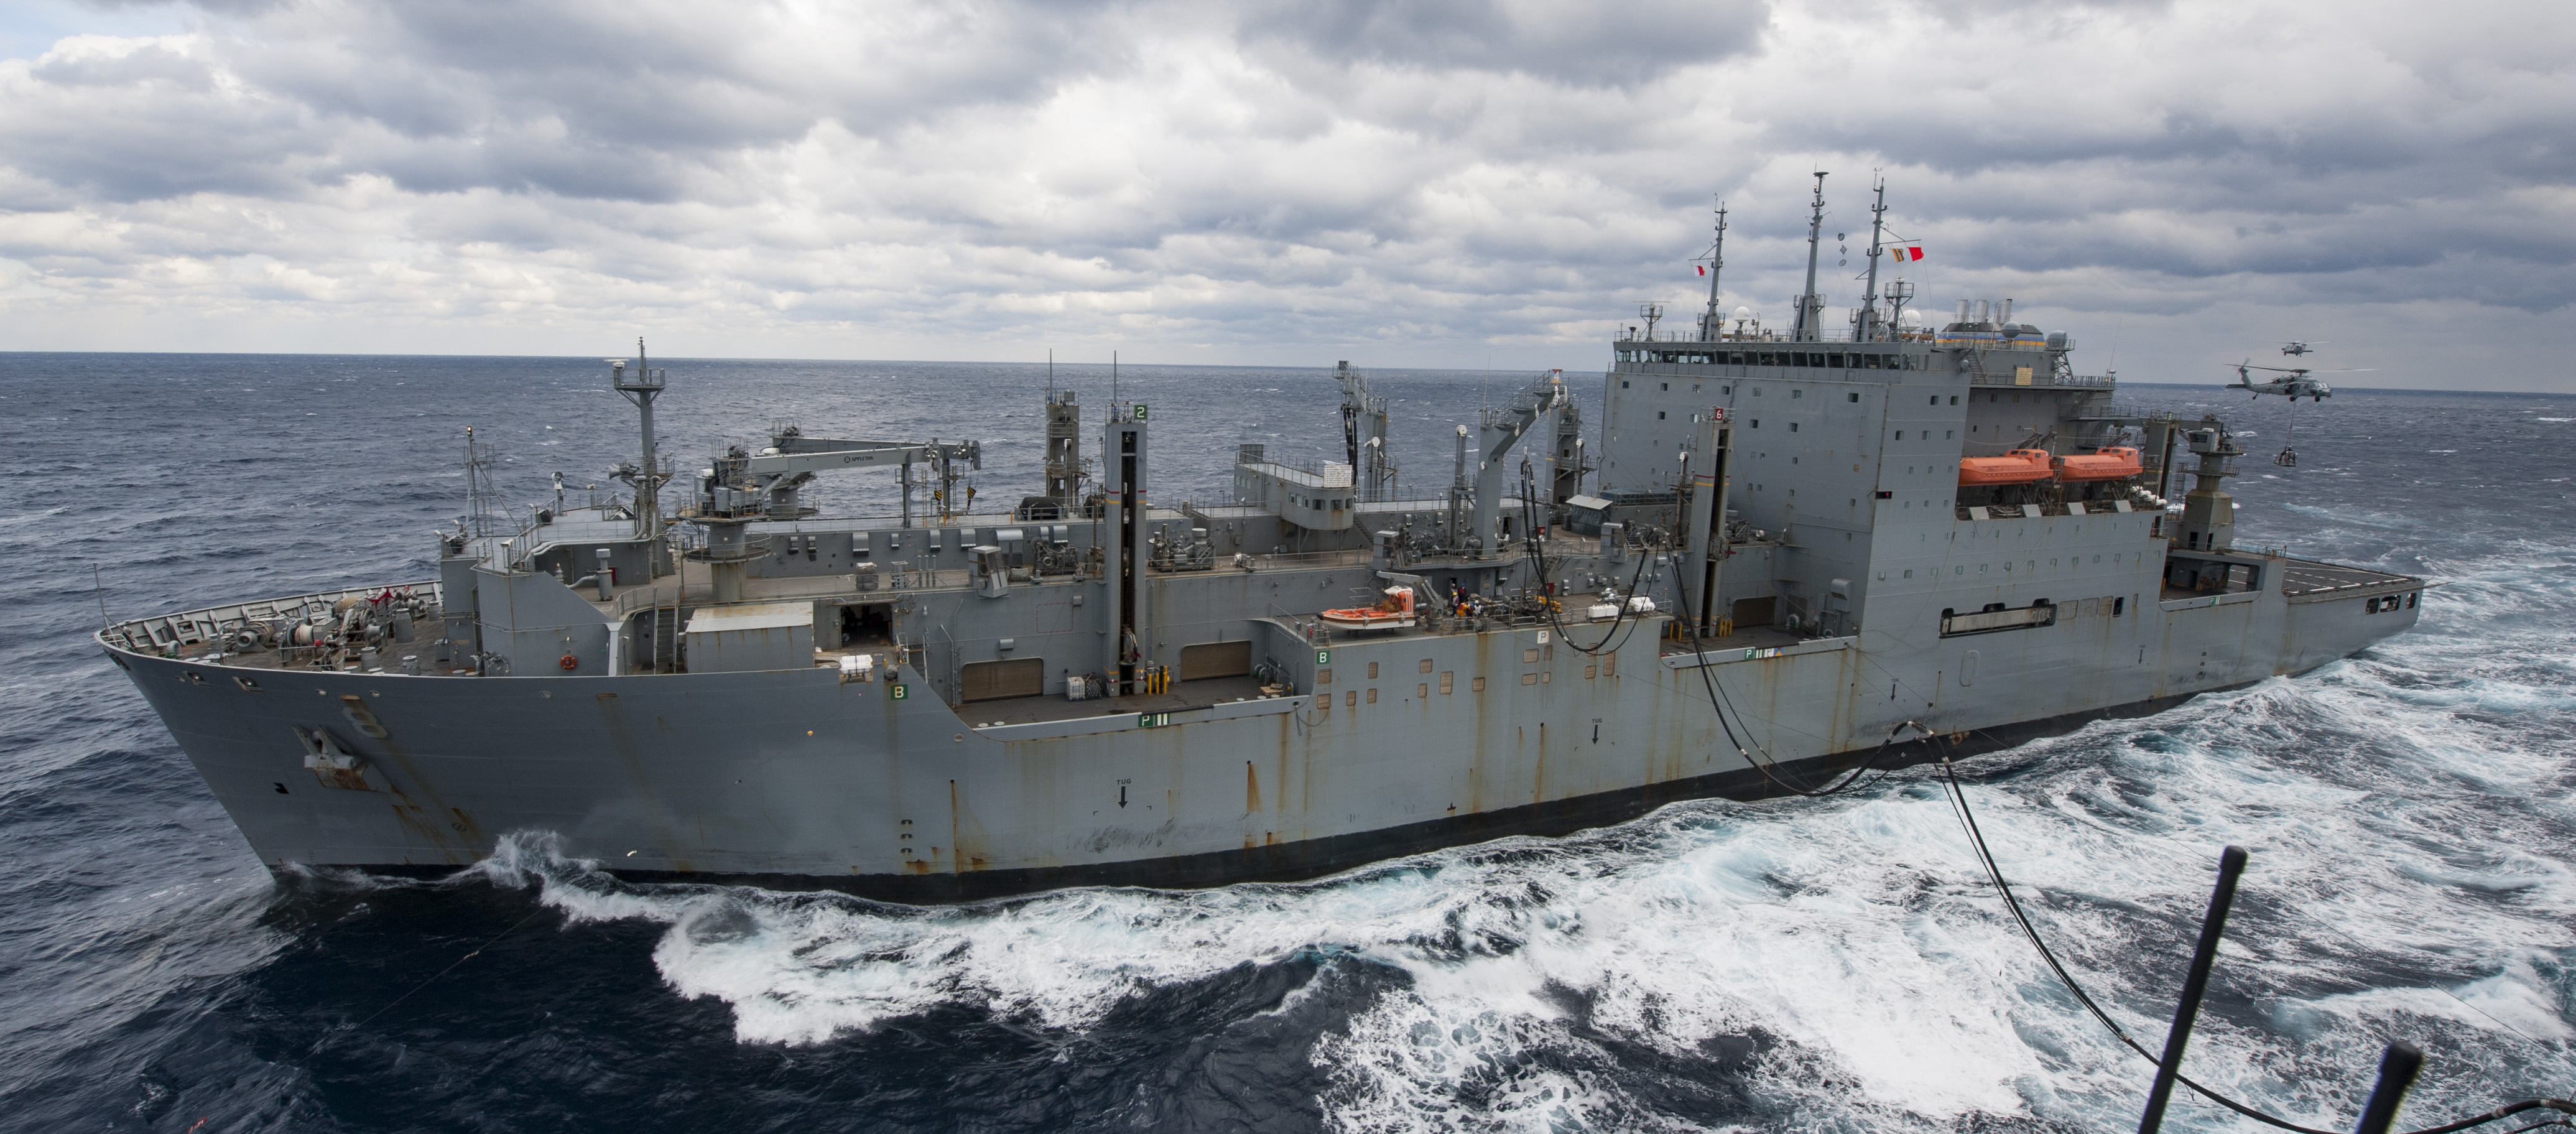 Military Sealift Command - support ships - auxiliary vessels - Page 2 38759644615_82b3d8a313_o